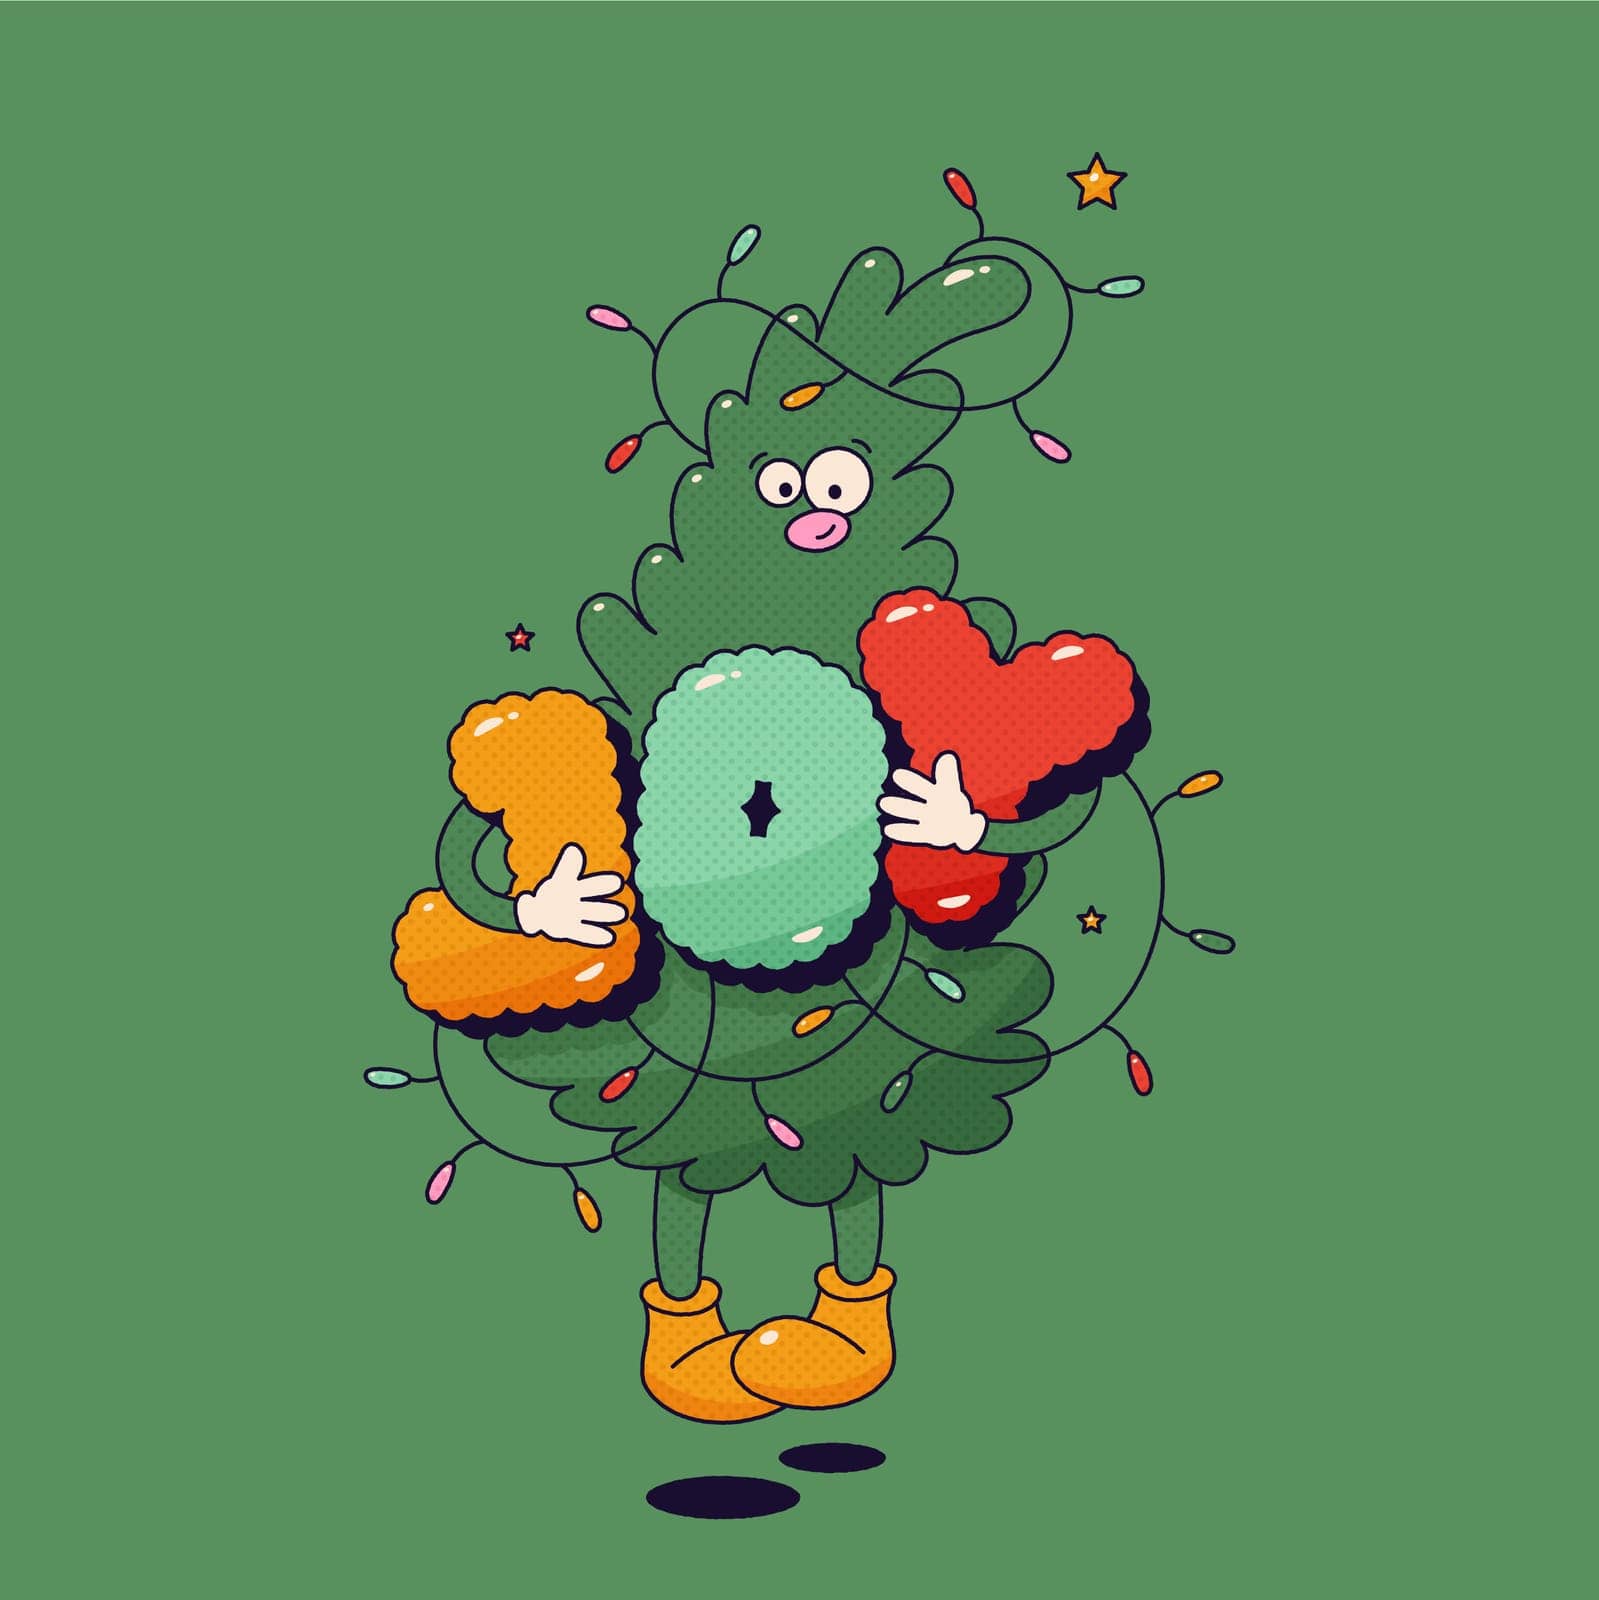 Christmas groovy mascot tree character with letters Joy and garland on green background.